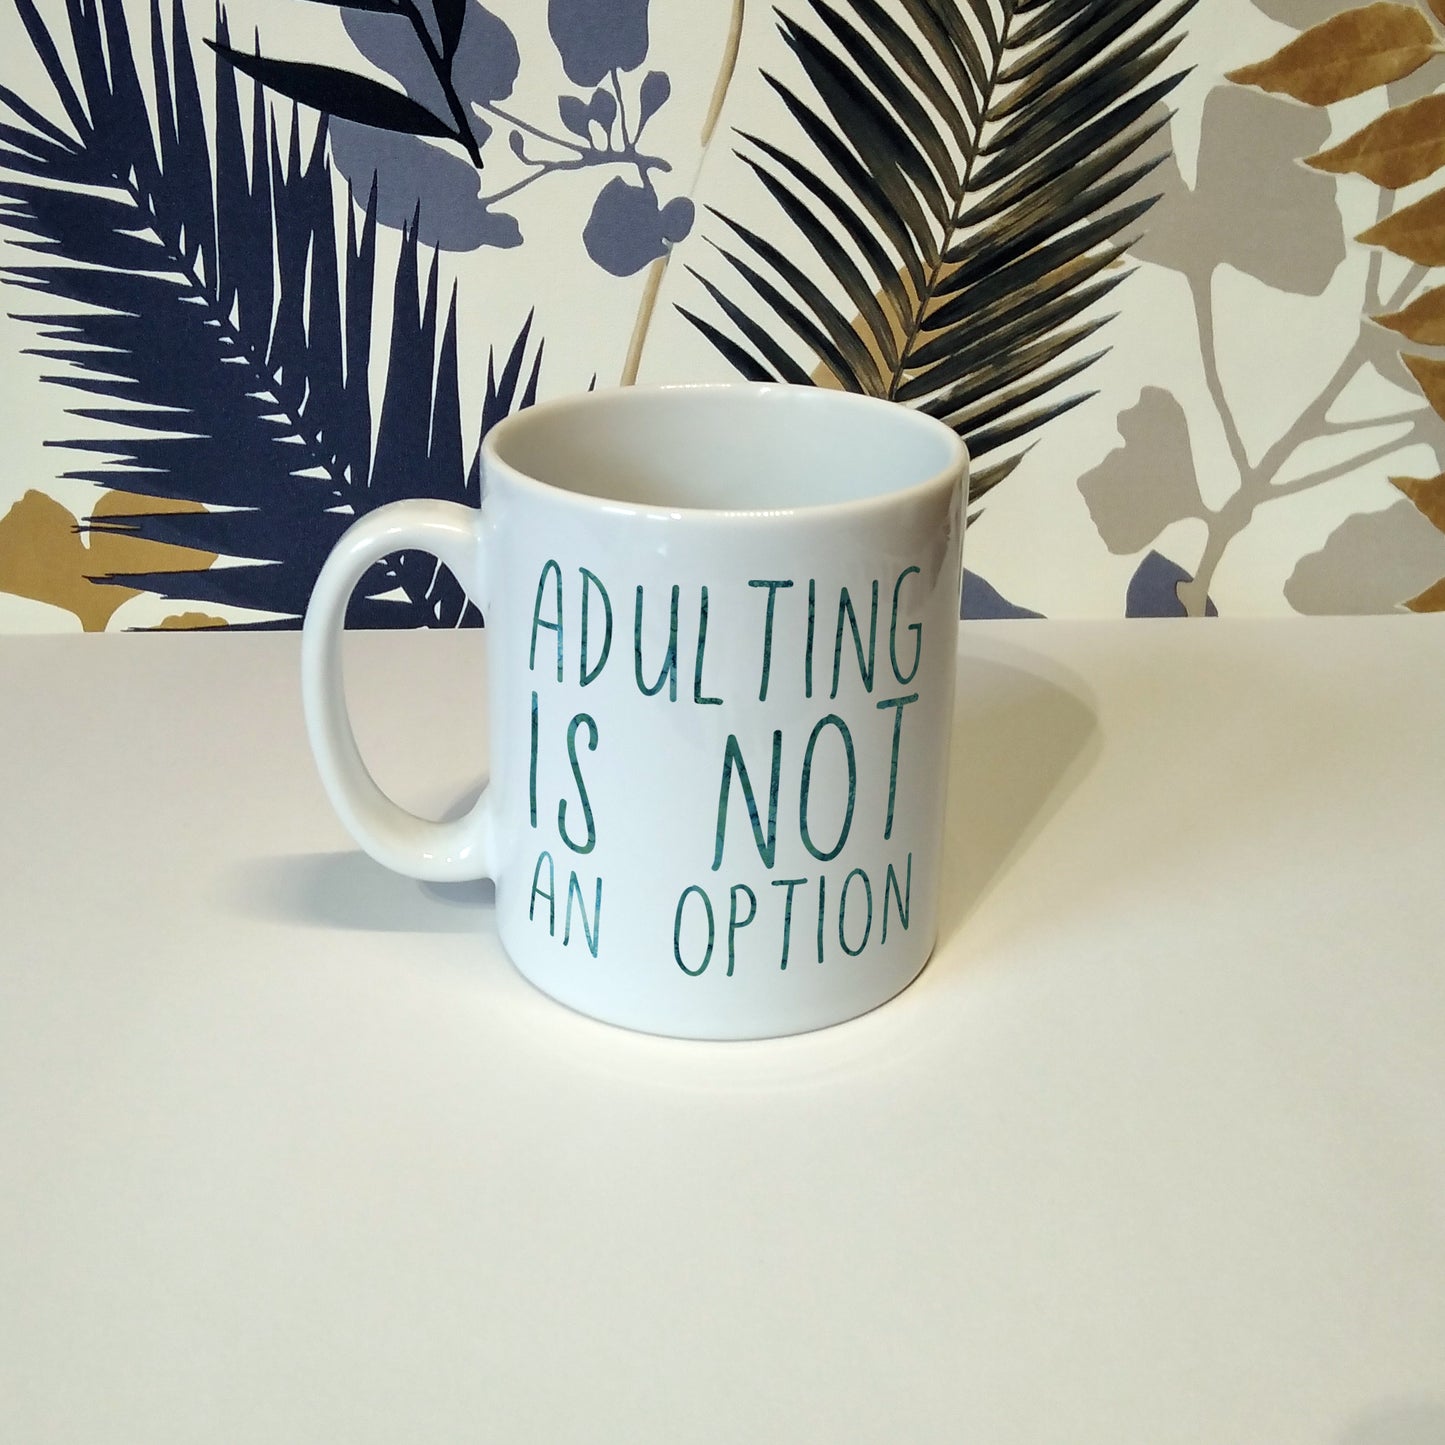 Adulting is not an option | Ceramic mug